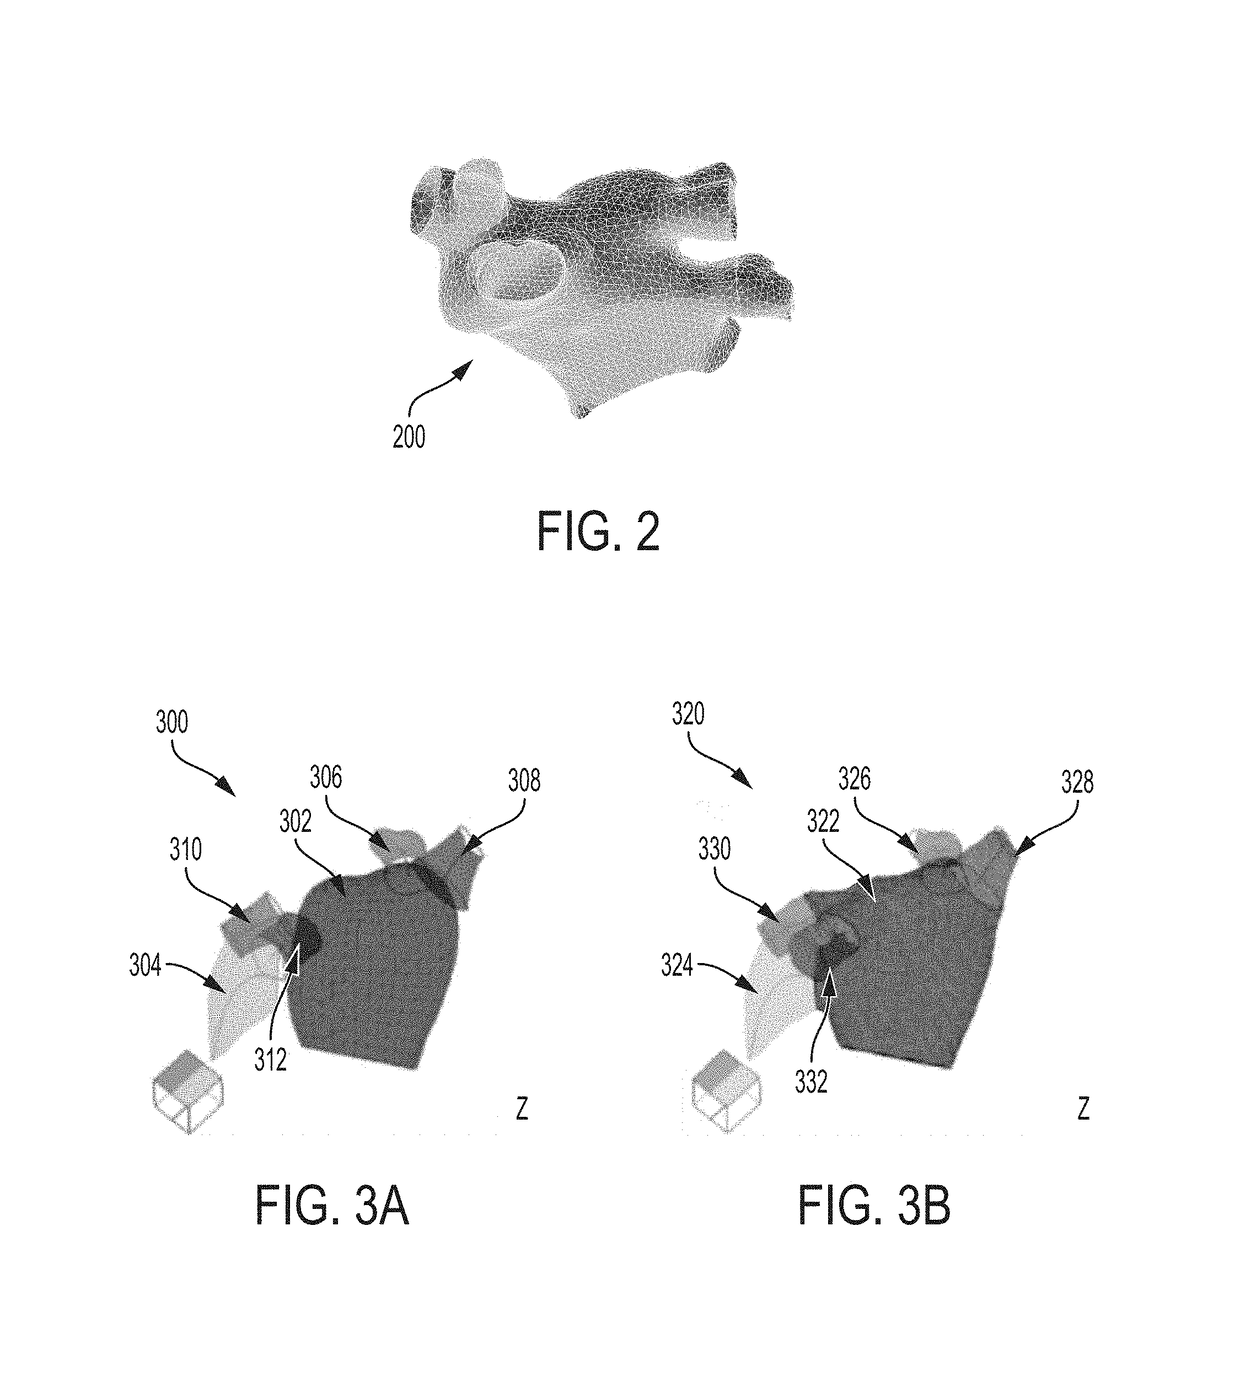 System and Method for Medical Image Based Cardio-Embolic Stroke Risk Prediction